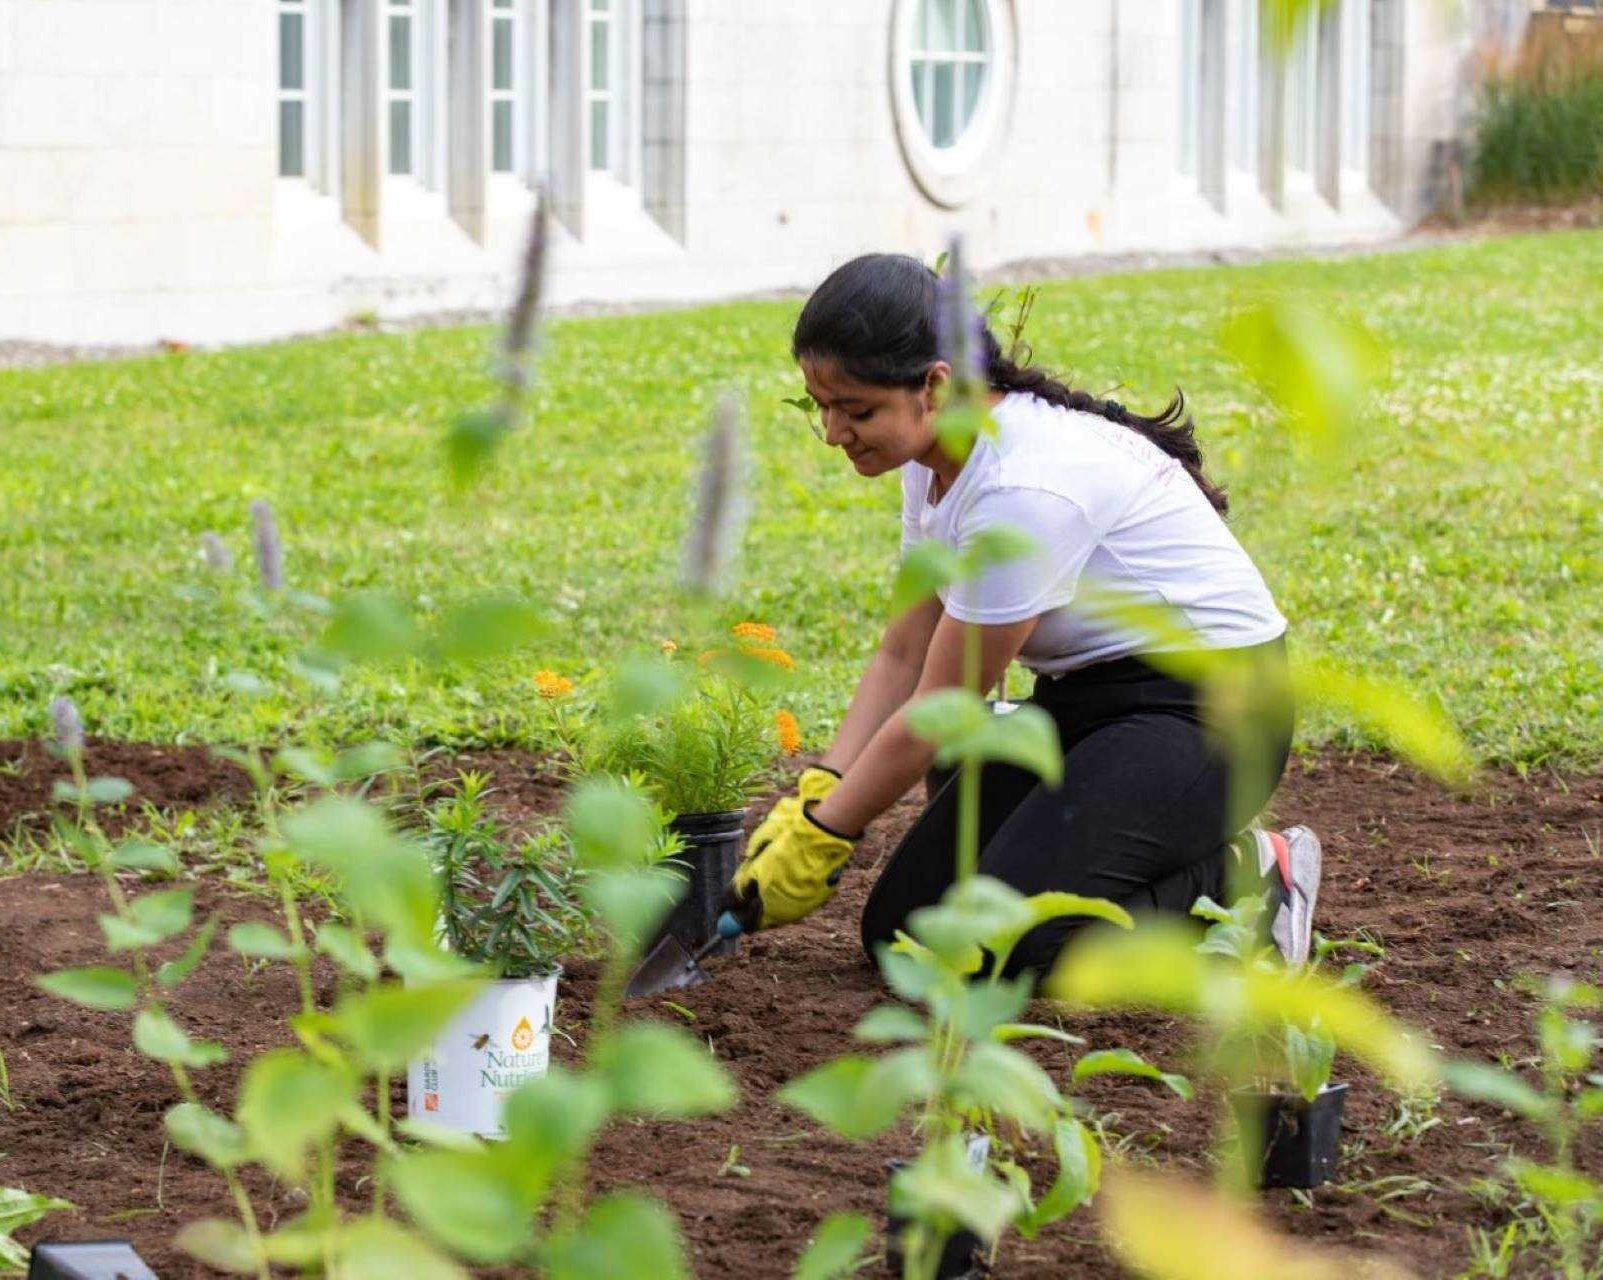 Surrounded by seedlings ready to transplant, a woman kneels in freshly turned eaarth at Loyola and digs a hole using a trowel.